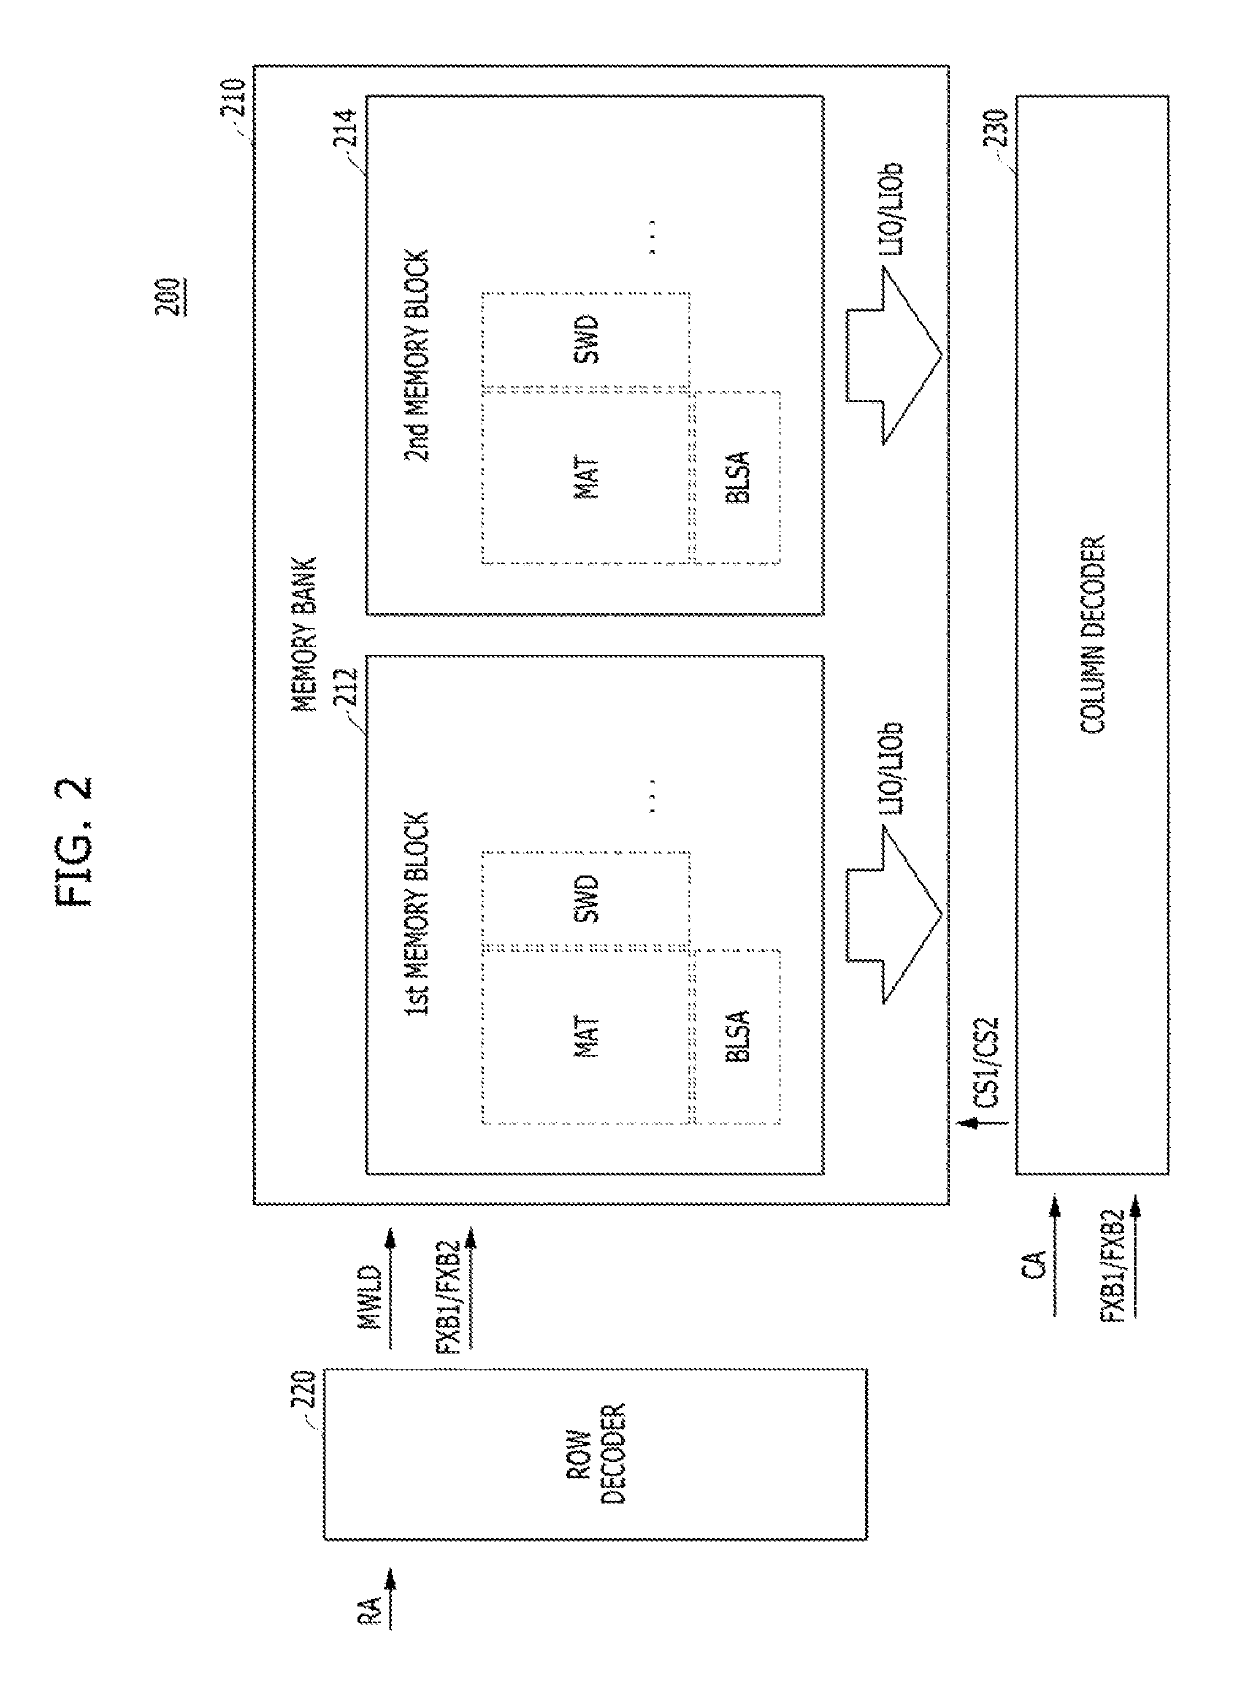 Semiconductor memory device, and signal line layout structure thereof